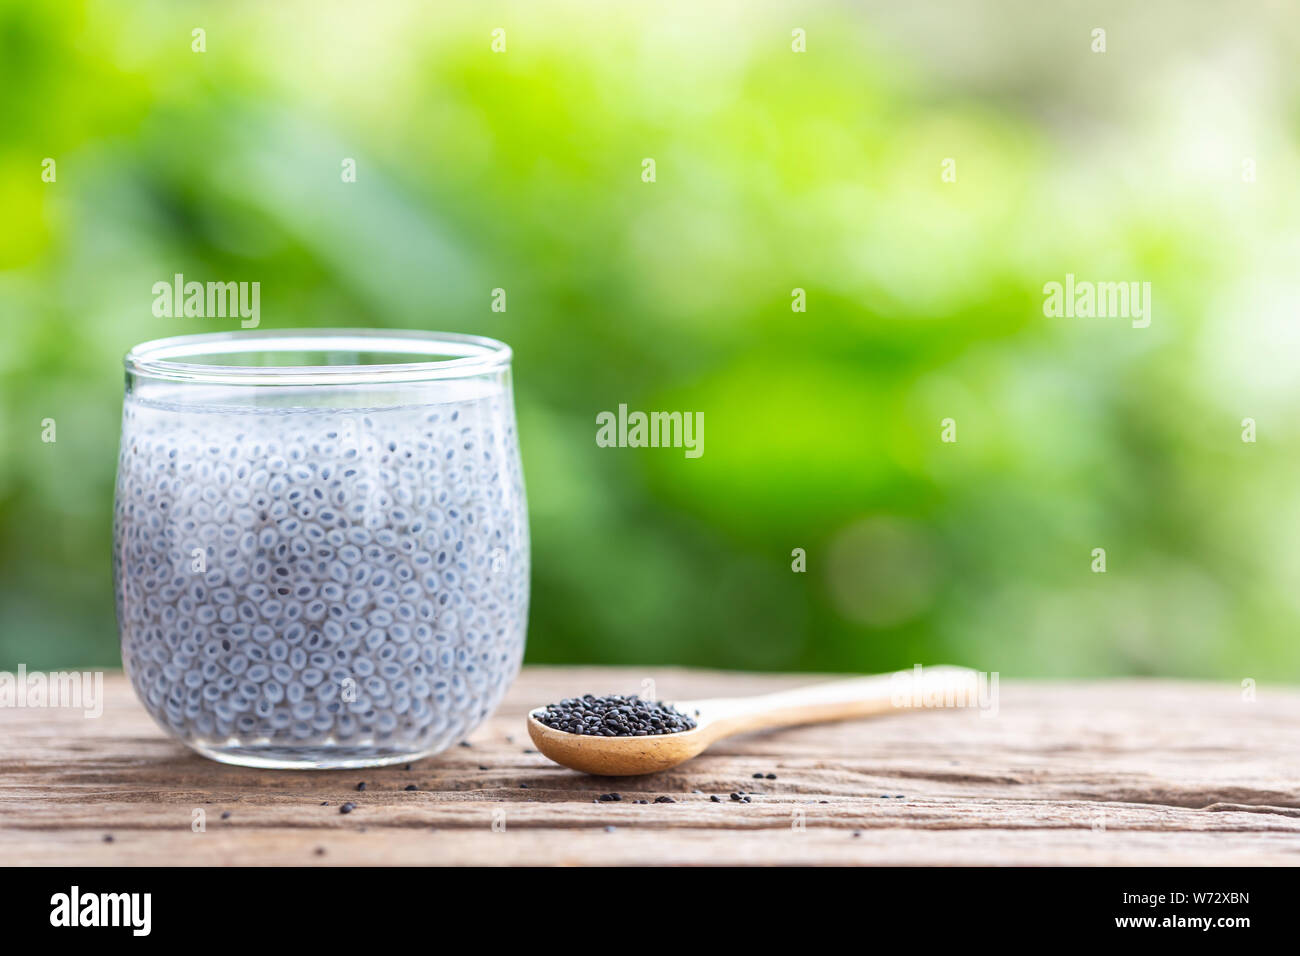 Close up lemon basil seeds in glass on wooden table Stock Photo